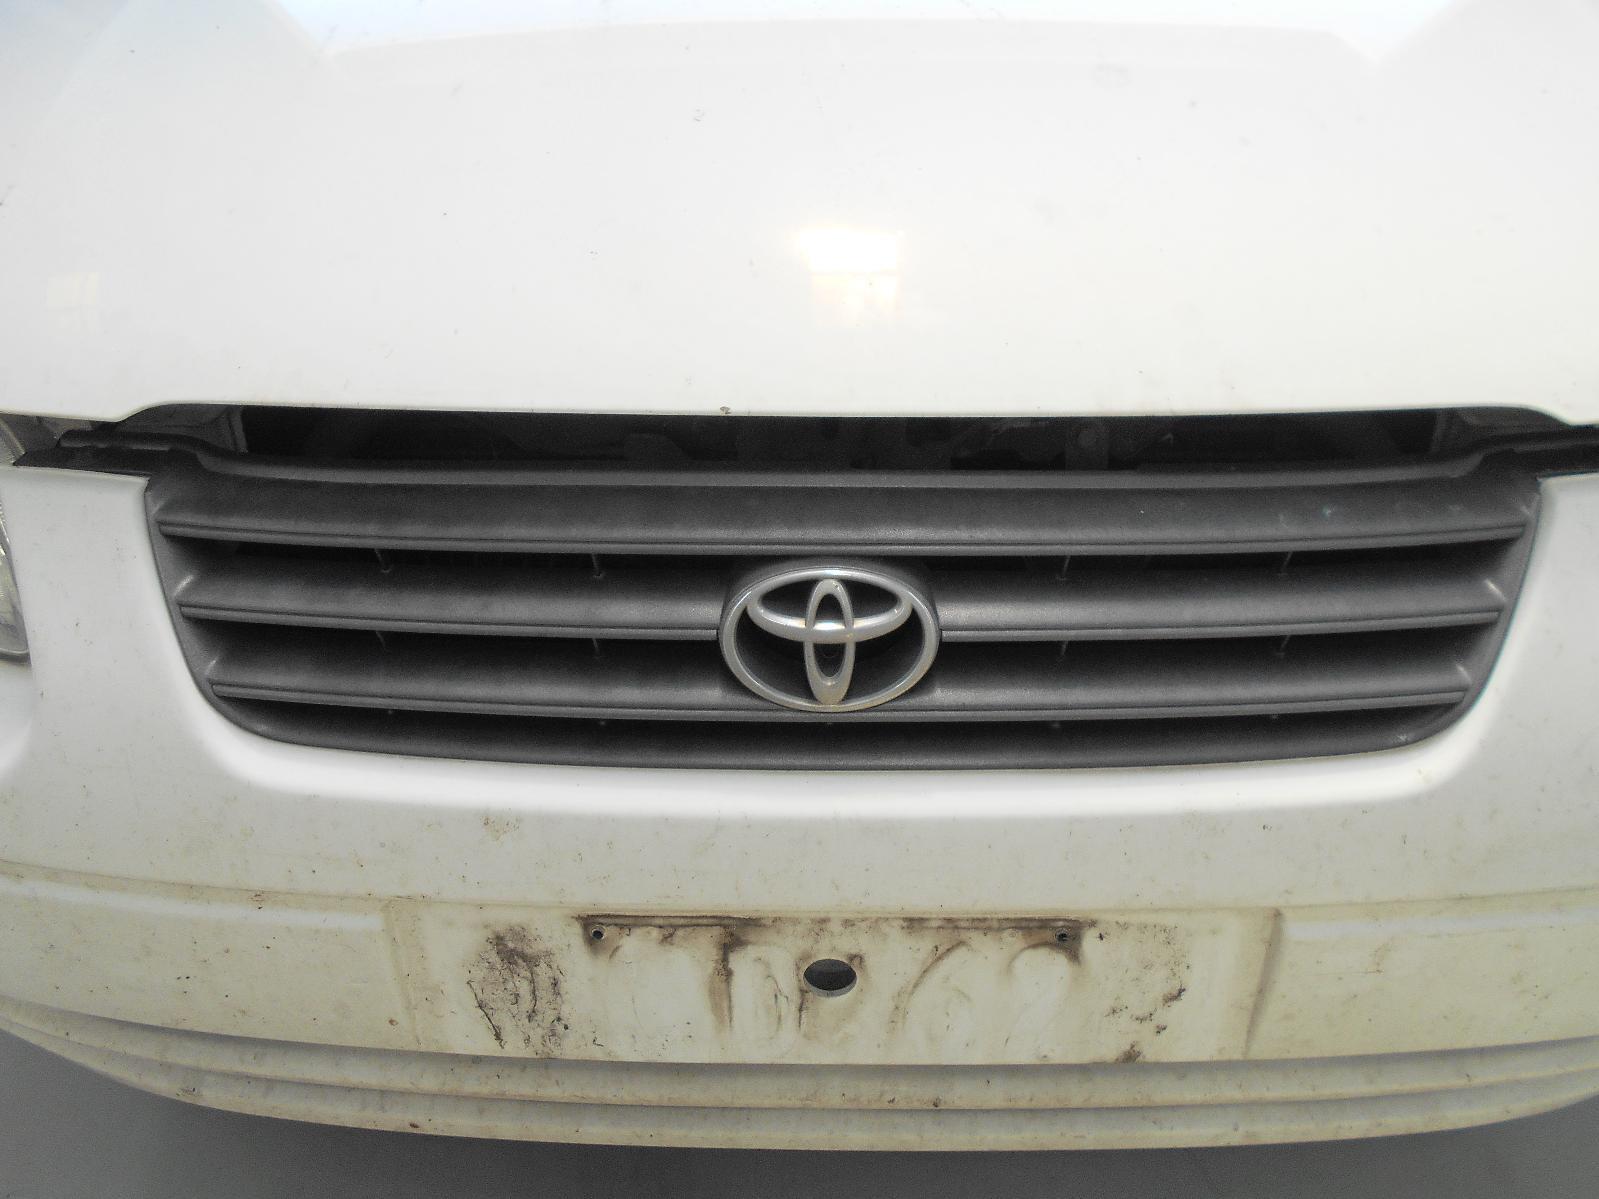 TOYOTA CAMRY, Grille, RADIATOR GRILLE, SK20, GREY, 08/97-09/00